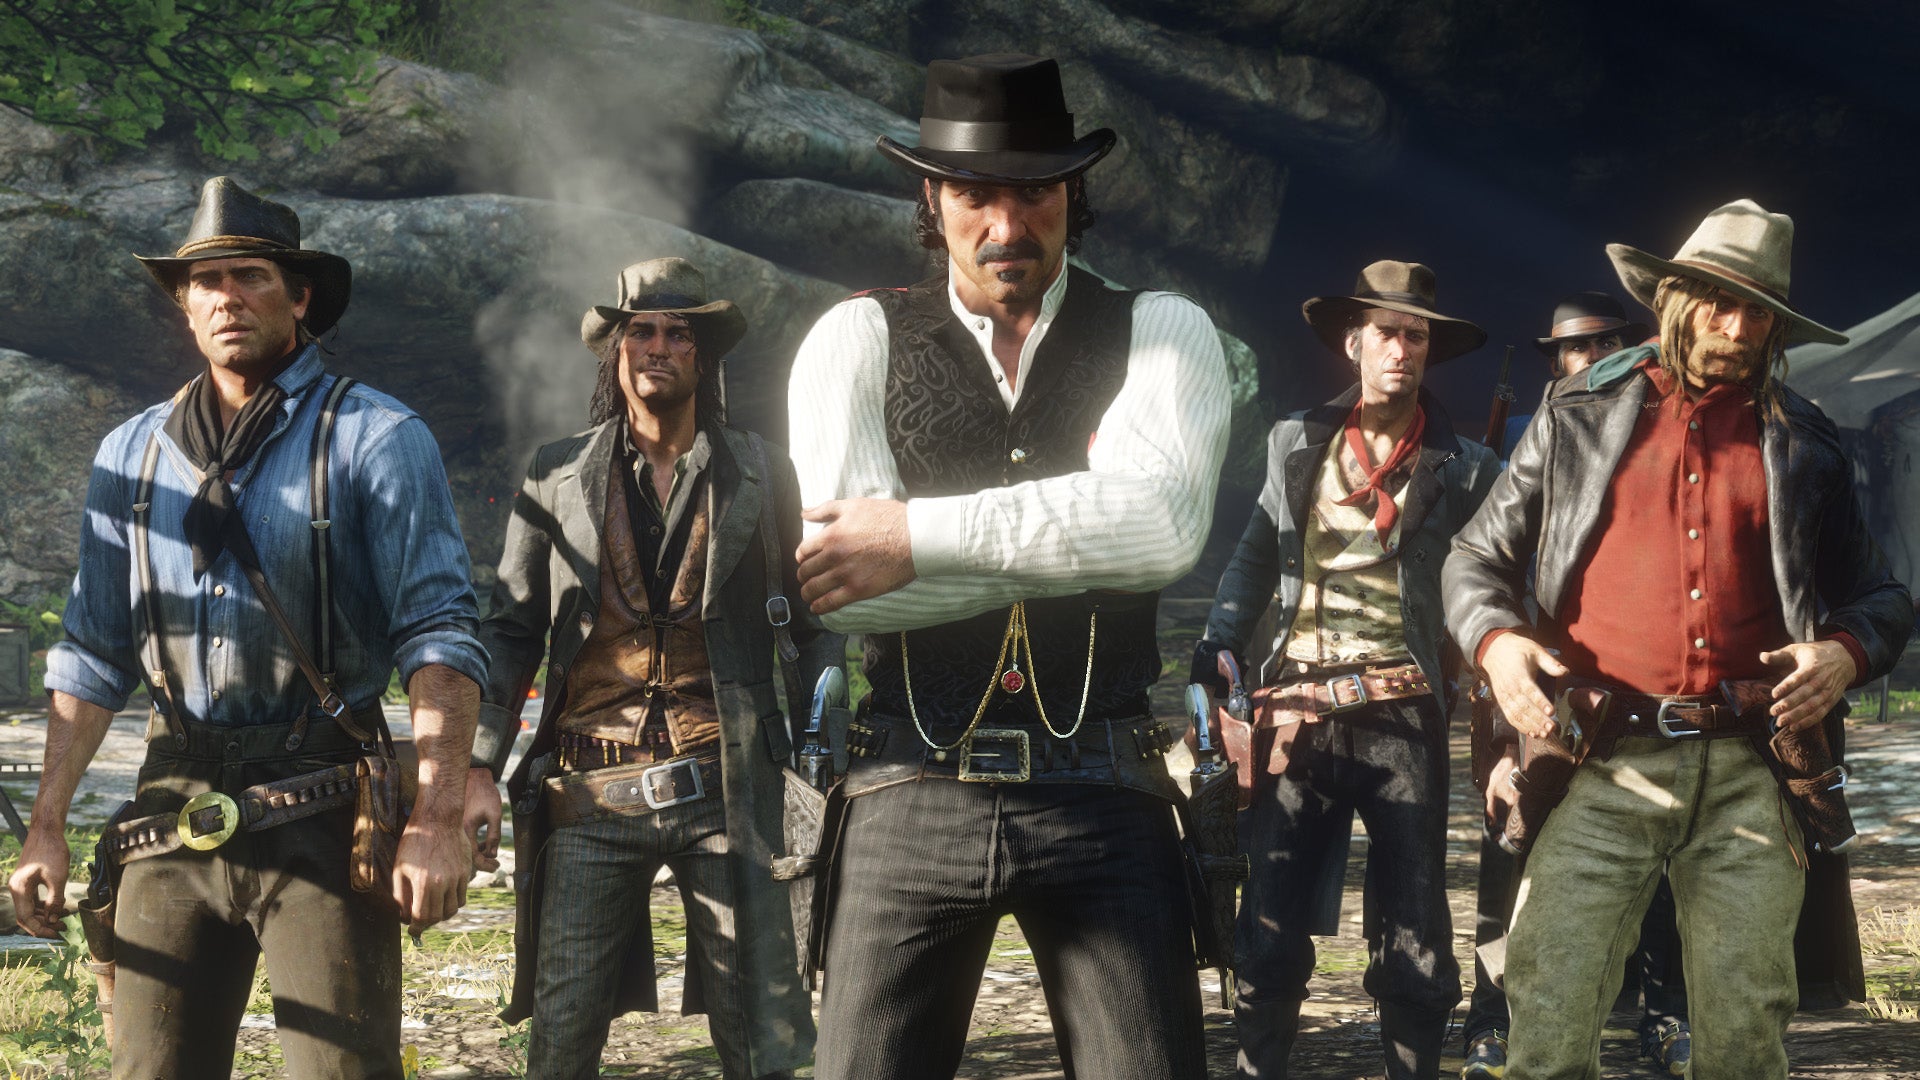 Image for Red Dead Redemption 2 is now available on Steam